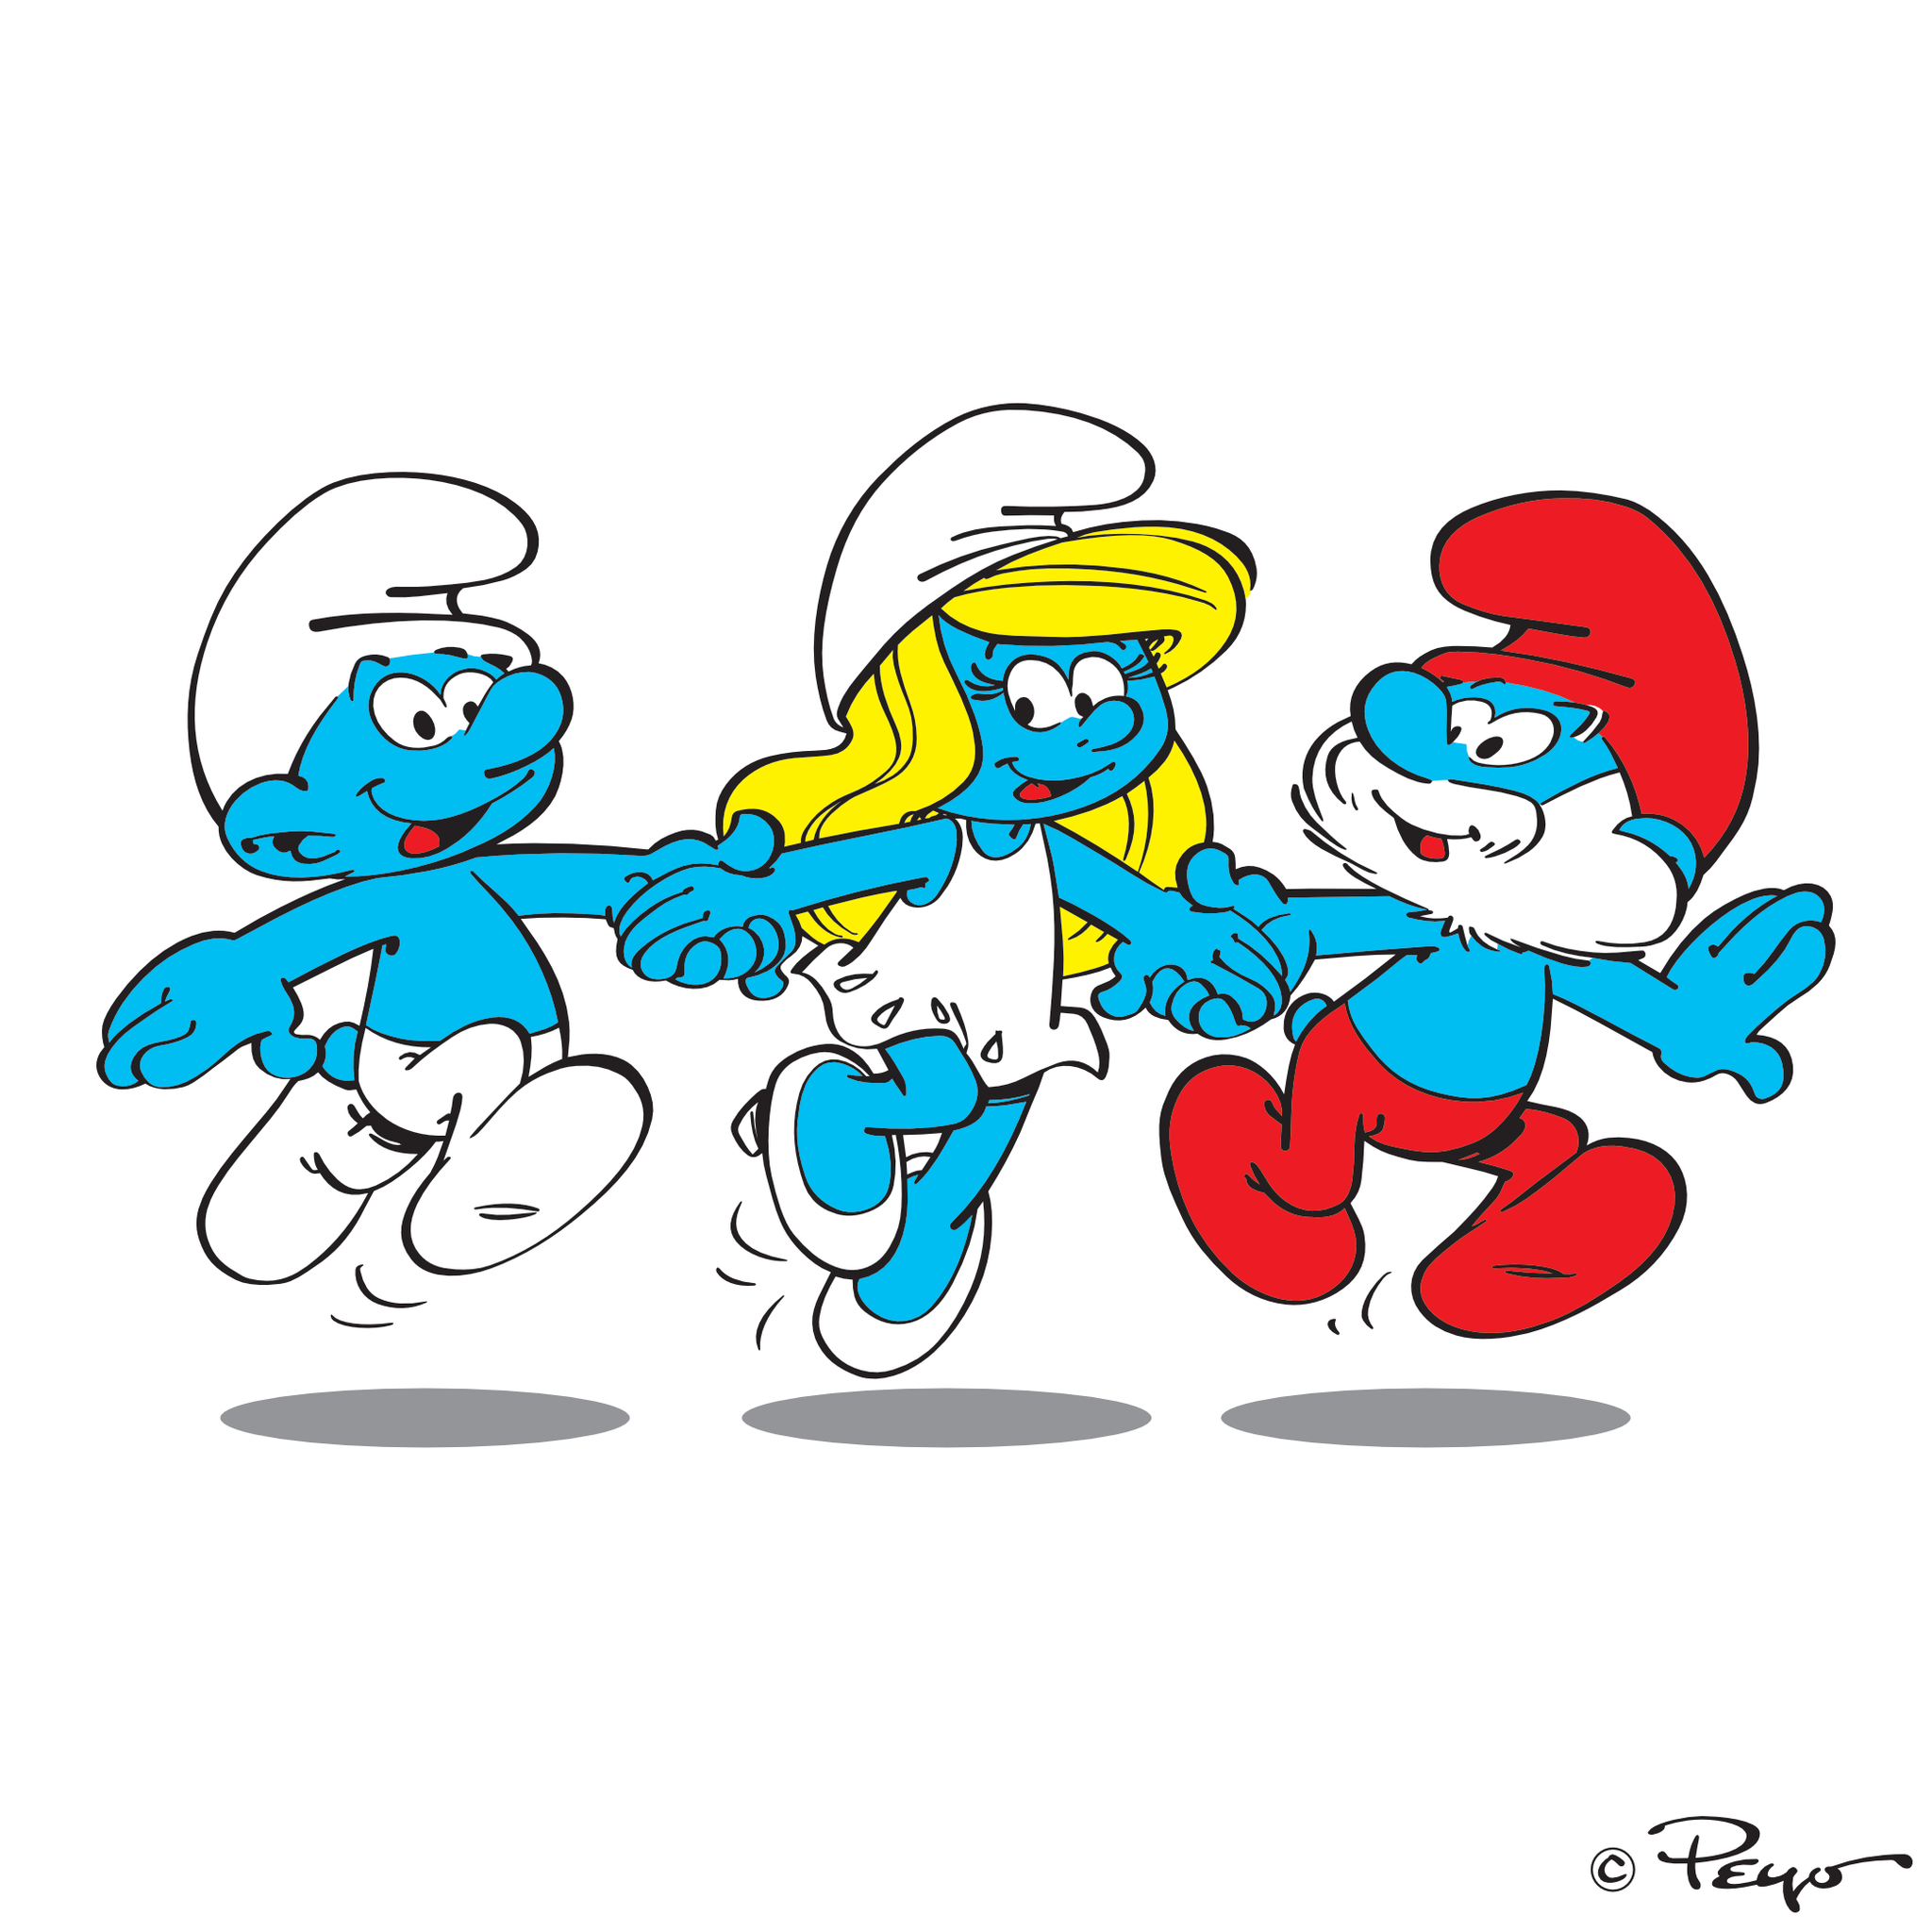 blake kemp recommends A Picture Of A Smurf